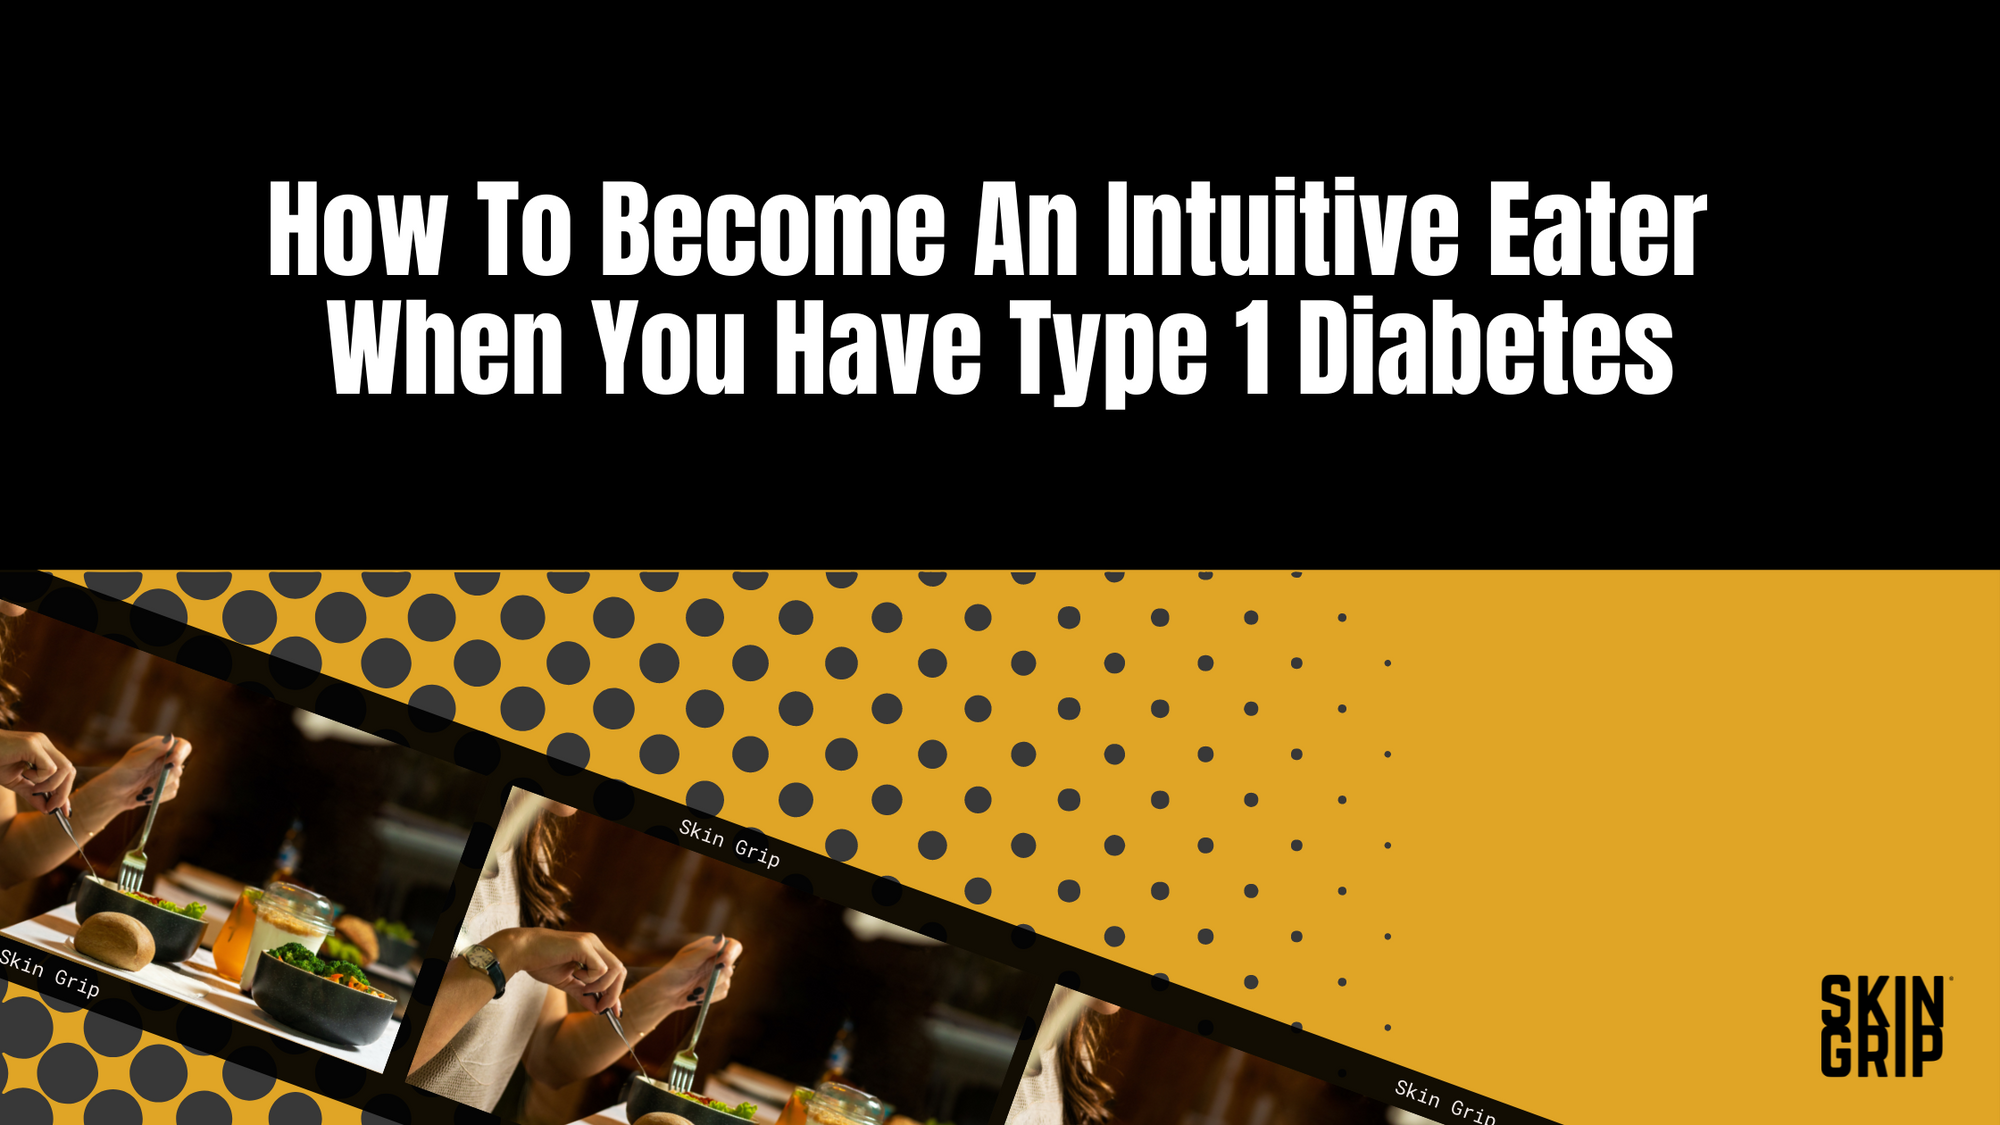 How To Become An Intuitive Eater When You Have Type 1 Diabetes